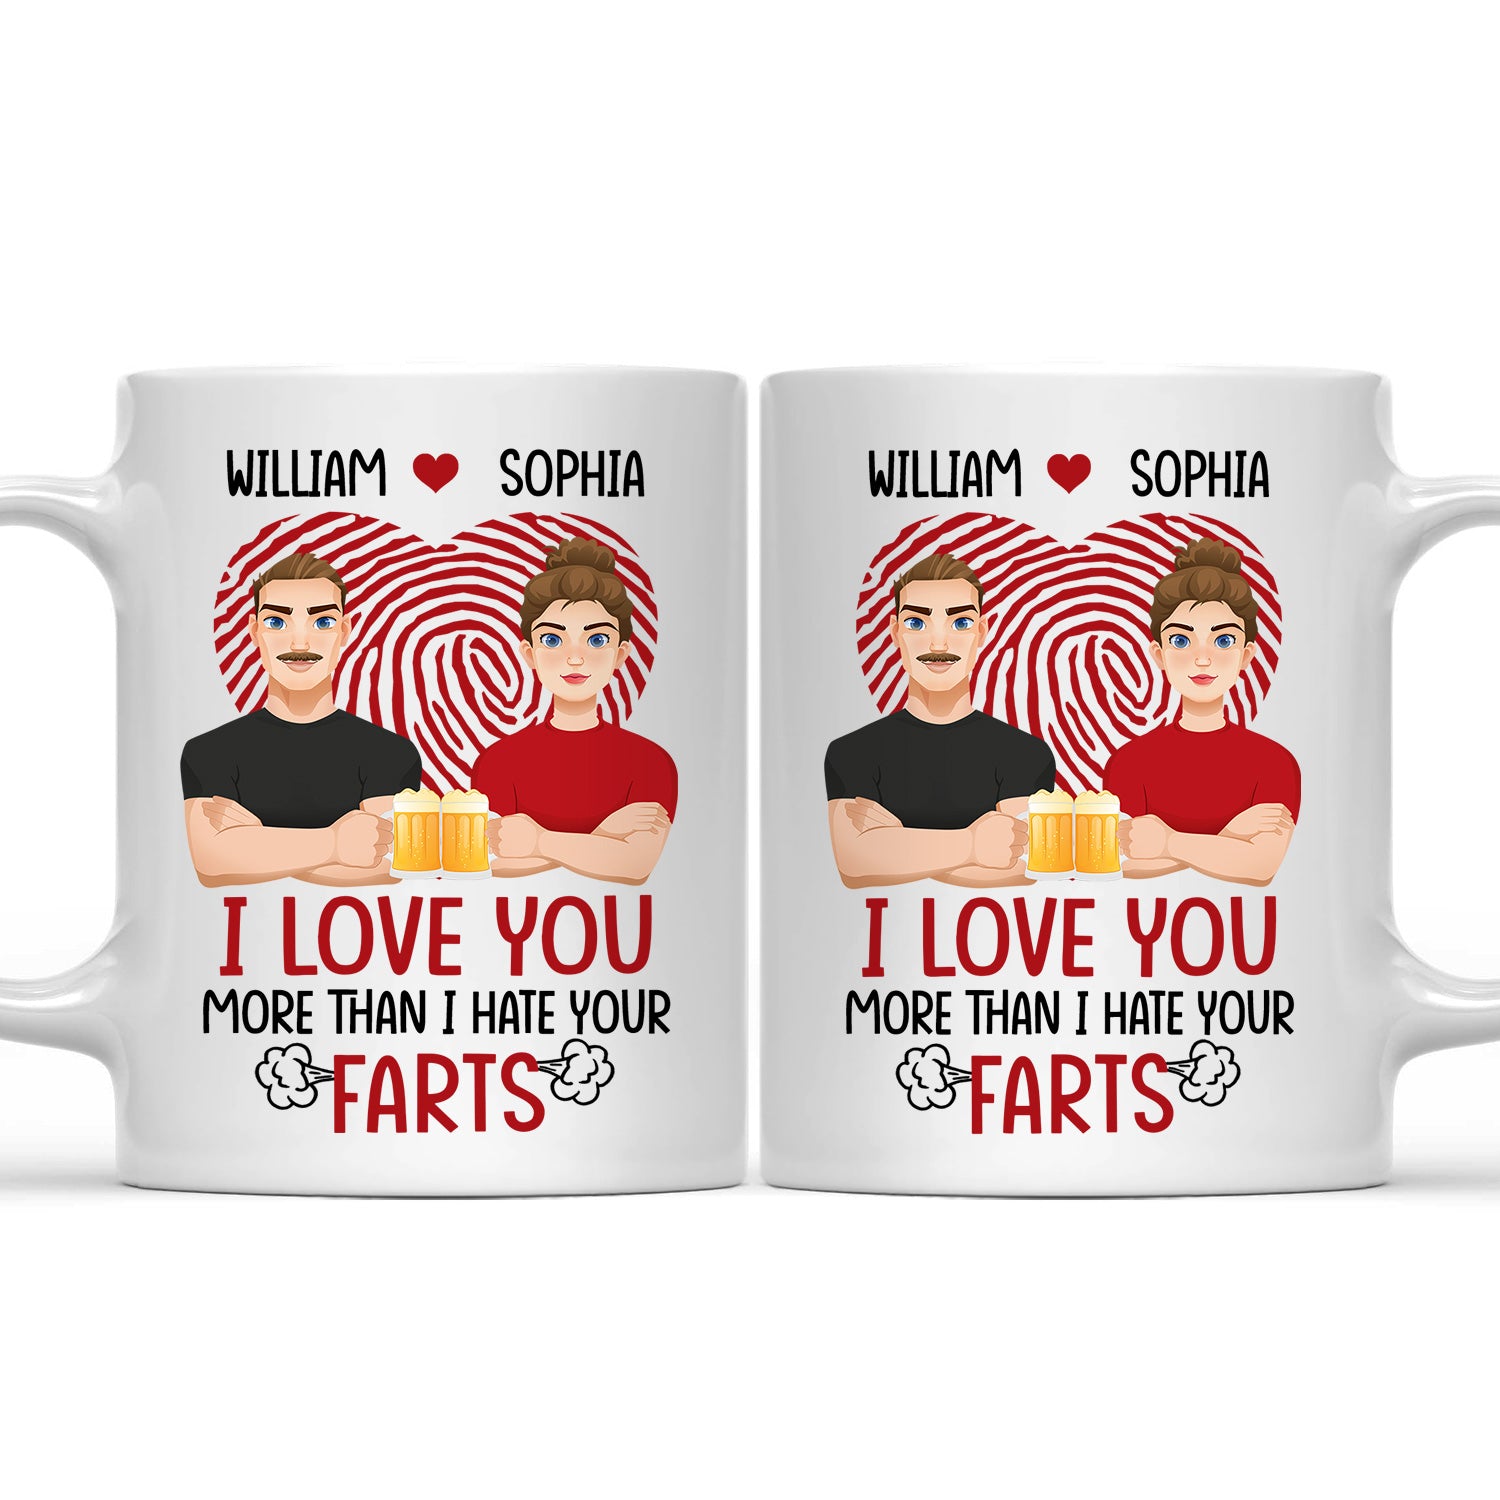 I Love You More Than I Hate Your Farts - Anniversary, Funny Gift For Couples, Husband, Wife - Personalized Mug